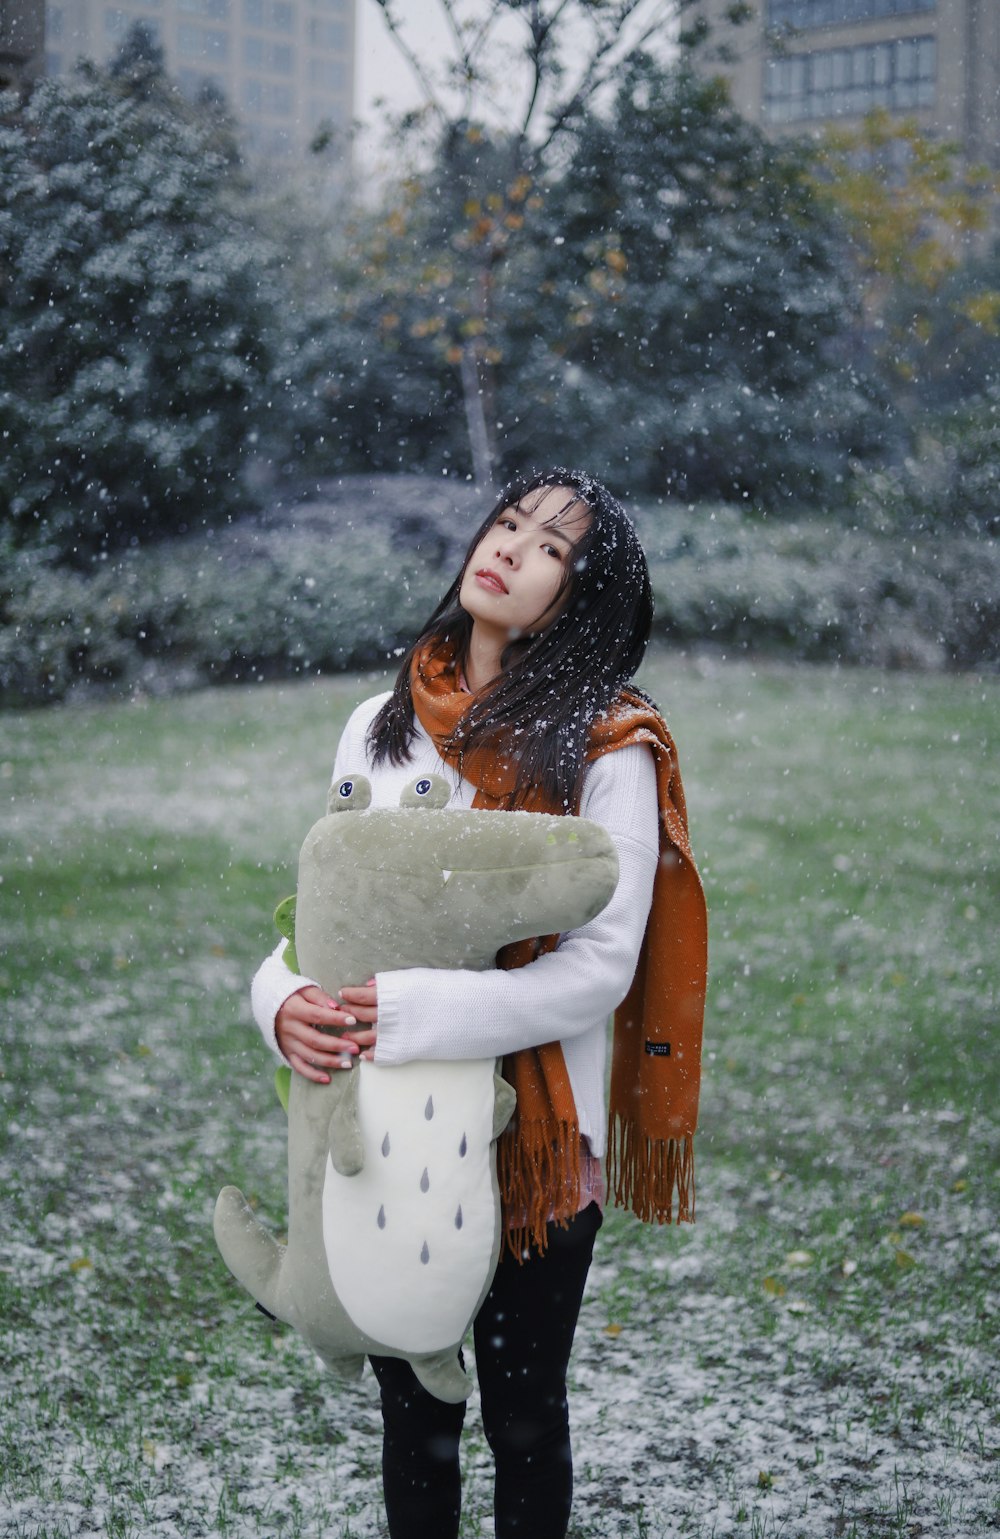 woman wearing white long-sleeved shirt, brown fringe scarf and holding gray plush toy during snowy daytime